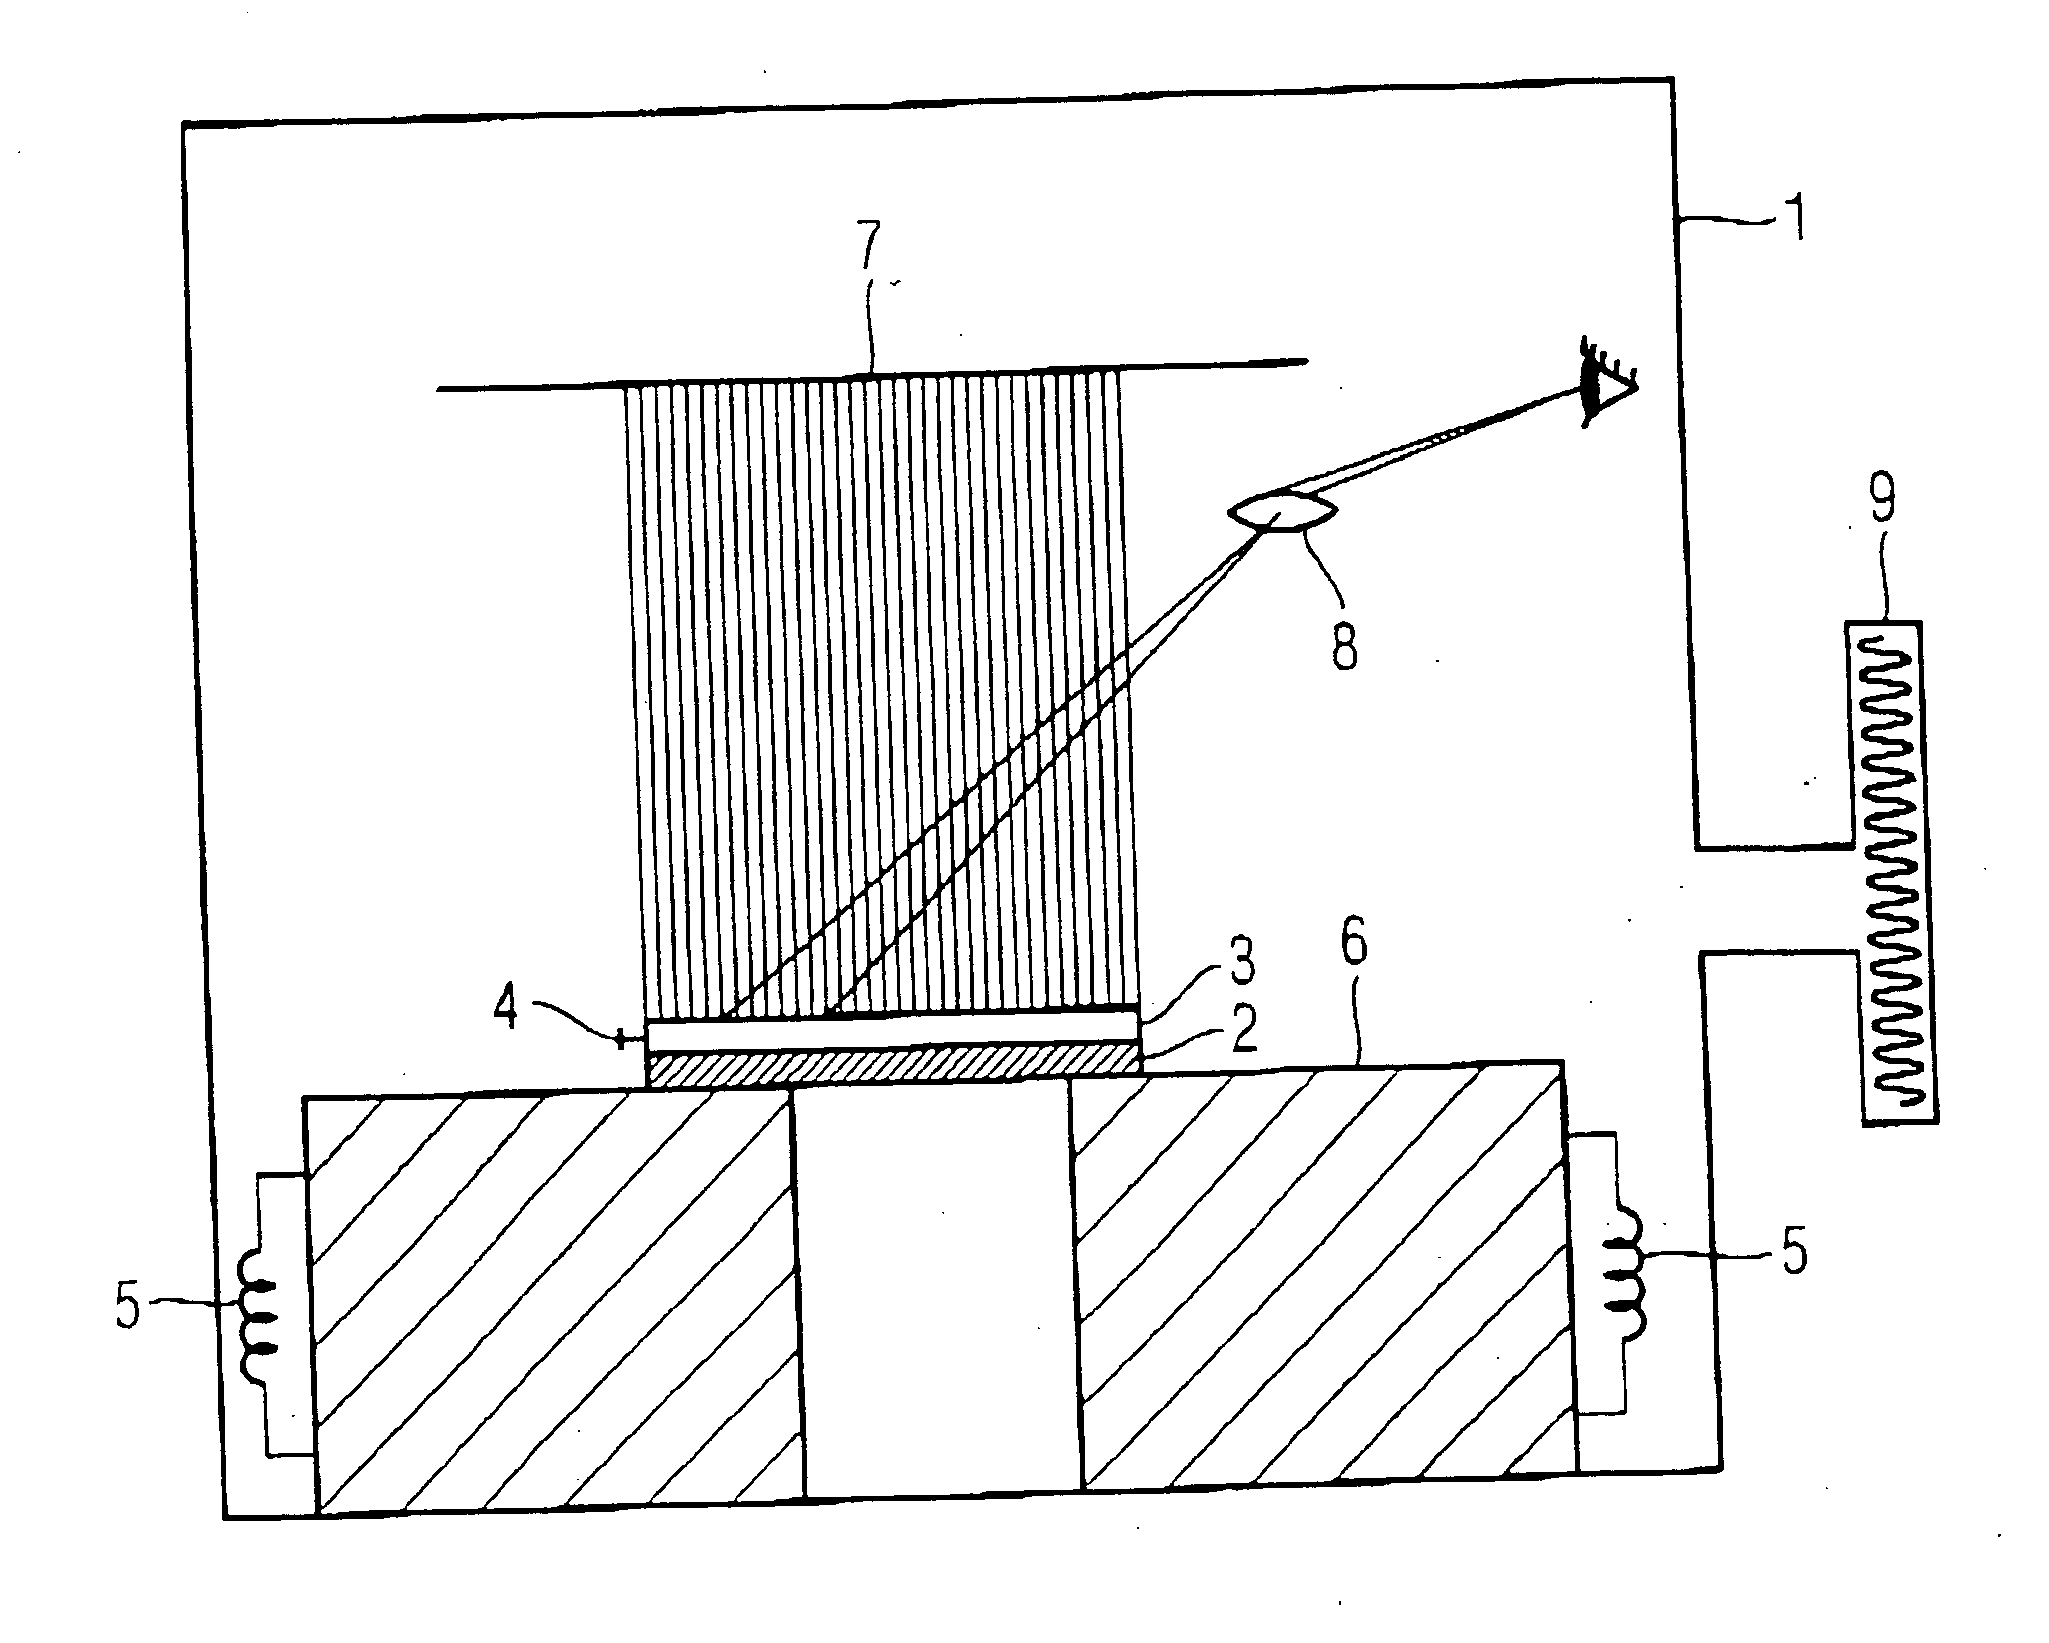 Method for cleaning lithographic apparatus